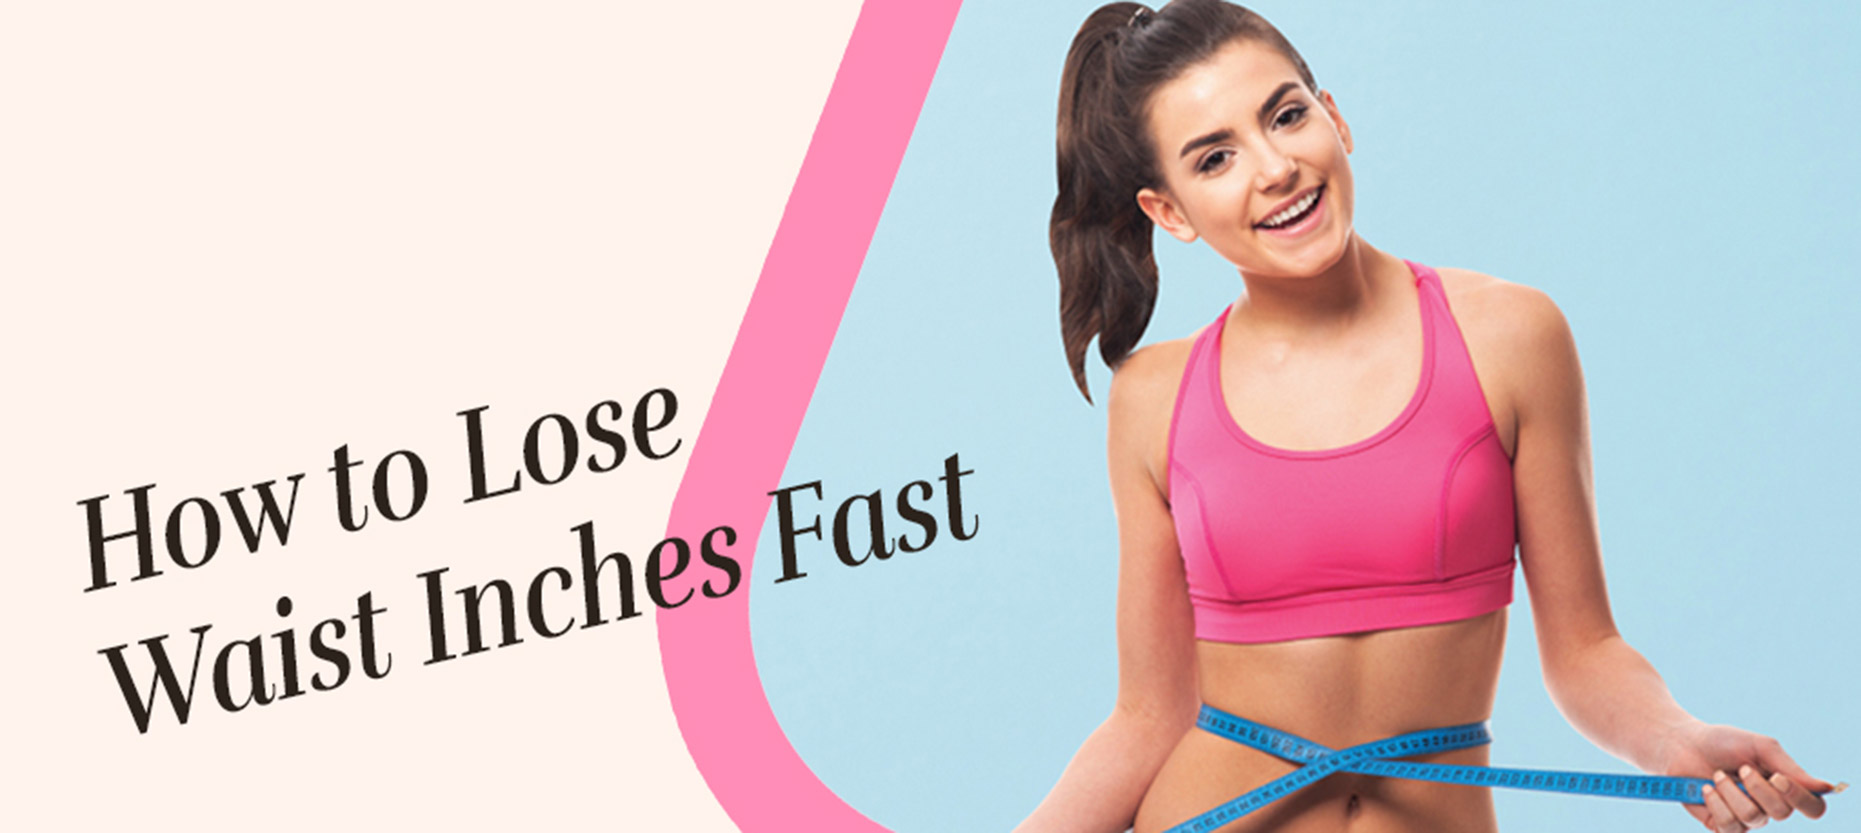 How To Lose Waist Inches Fast